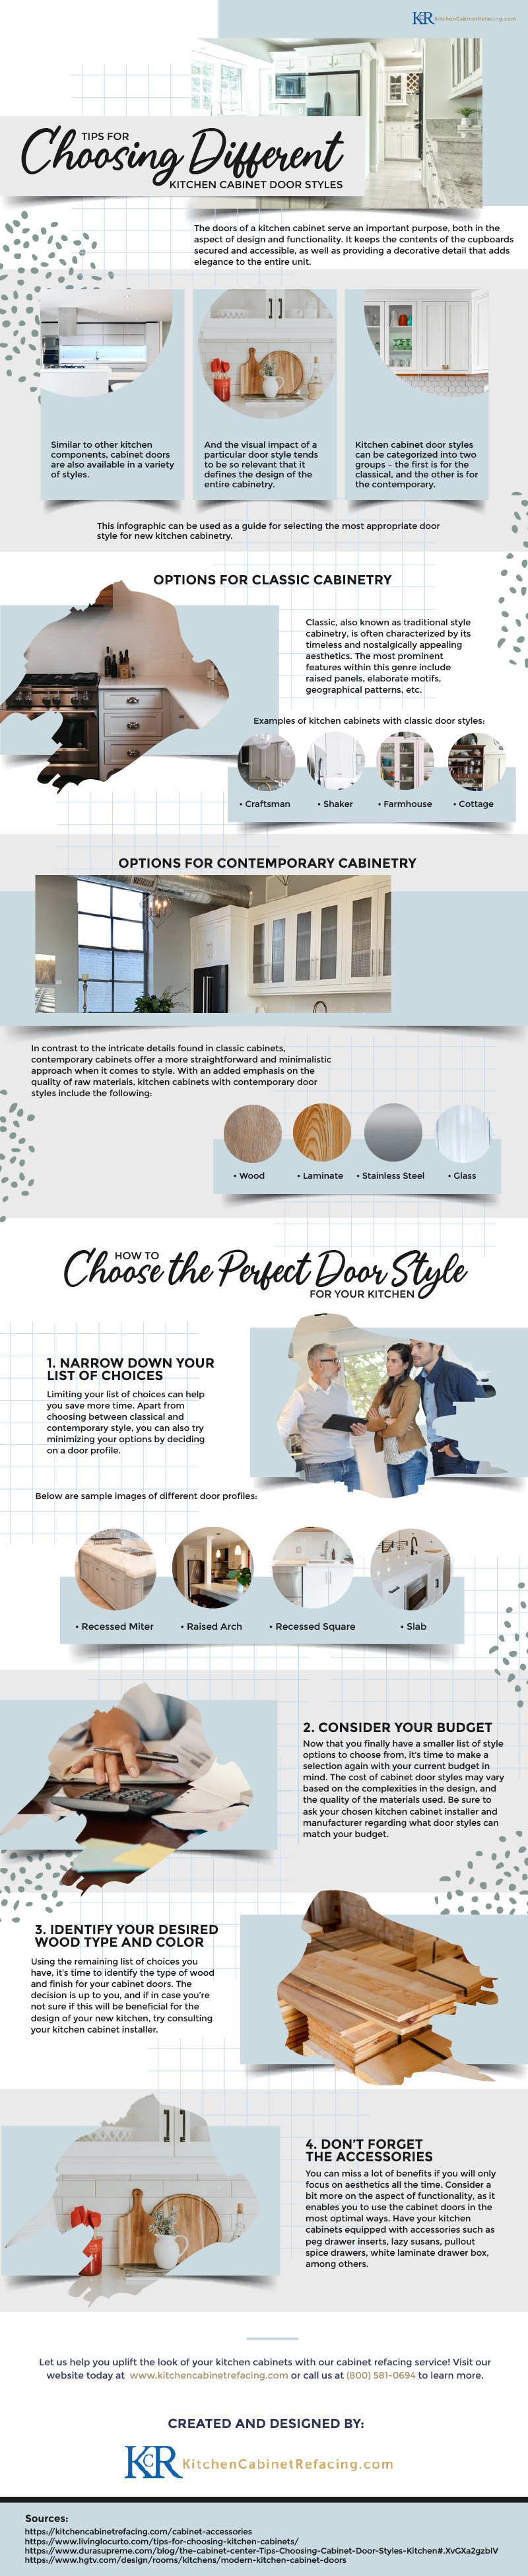 Tips_for_Choosing_Different_Kitchen_Cabinet_Door_Styles_infographic